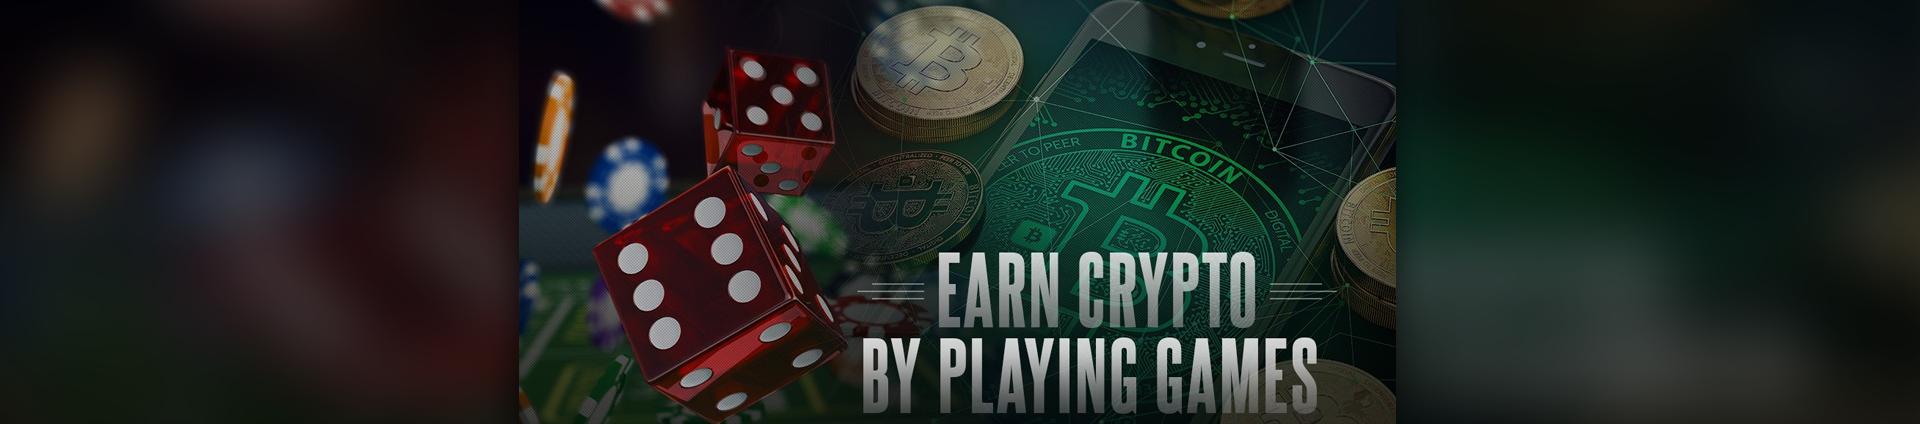 NFT Play-to-Earn crypto games in Gaming Industry